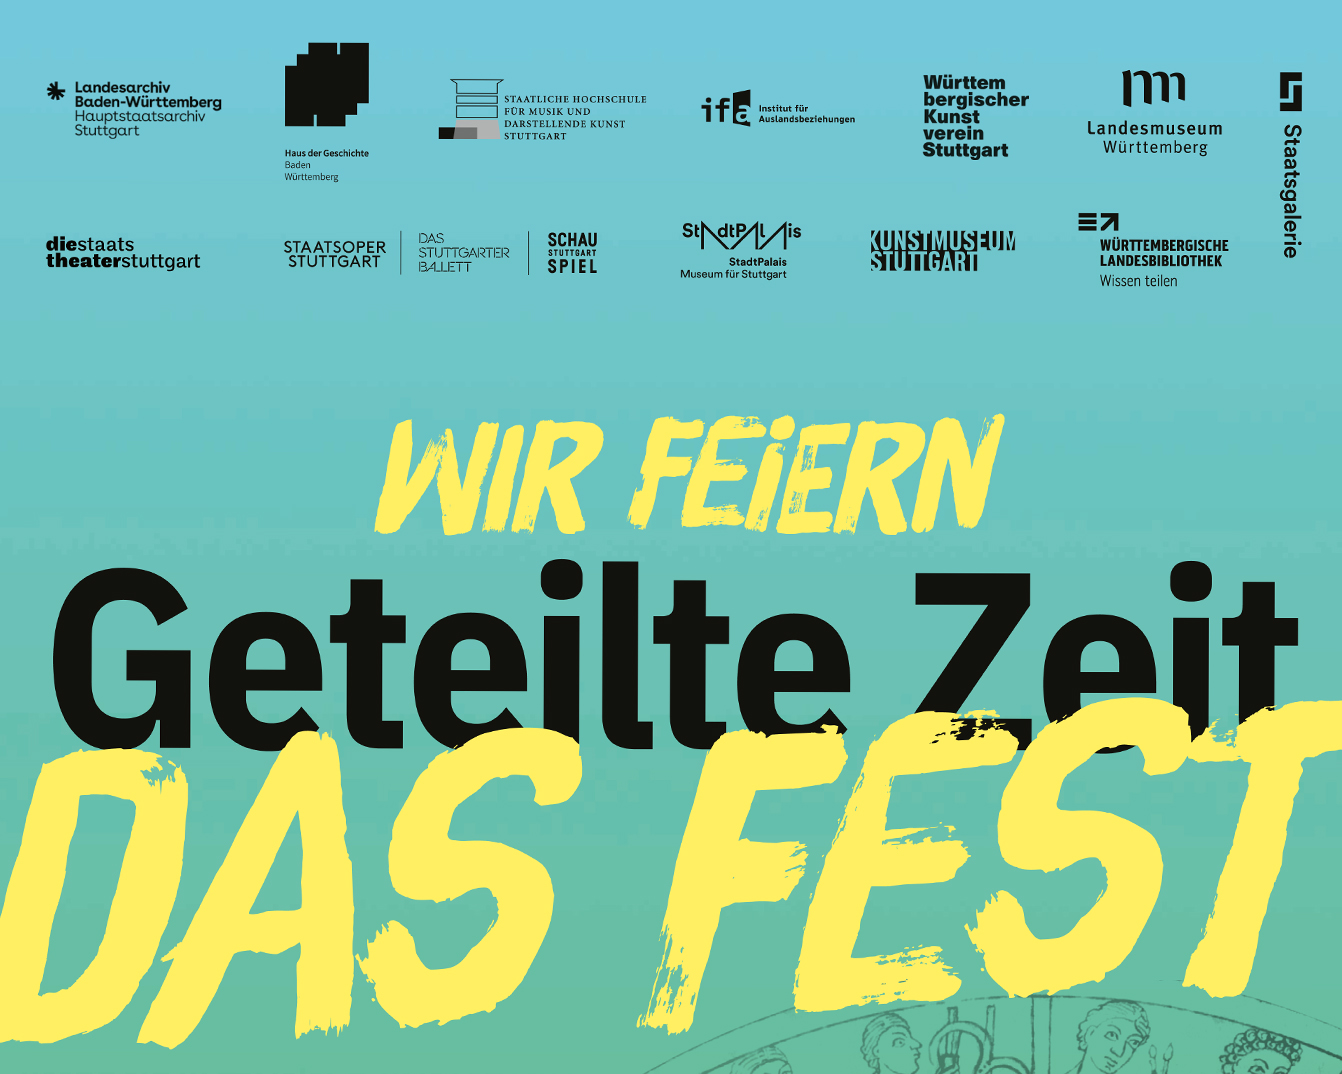 Poster with turquoise background. Smaller lettering at the back in yellow: WIR FEIERN. Larger in black in front: Geteilte Zeit. And at the bottom of the picture, large in yellow: DAS FEST.